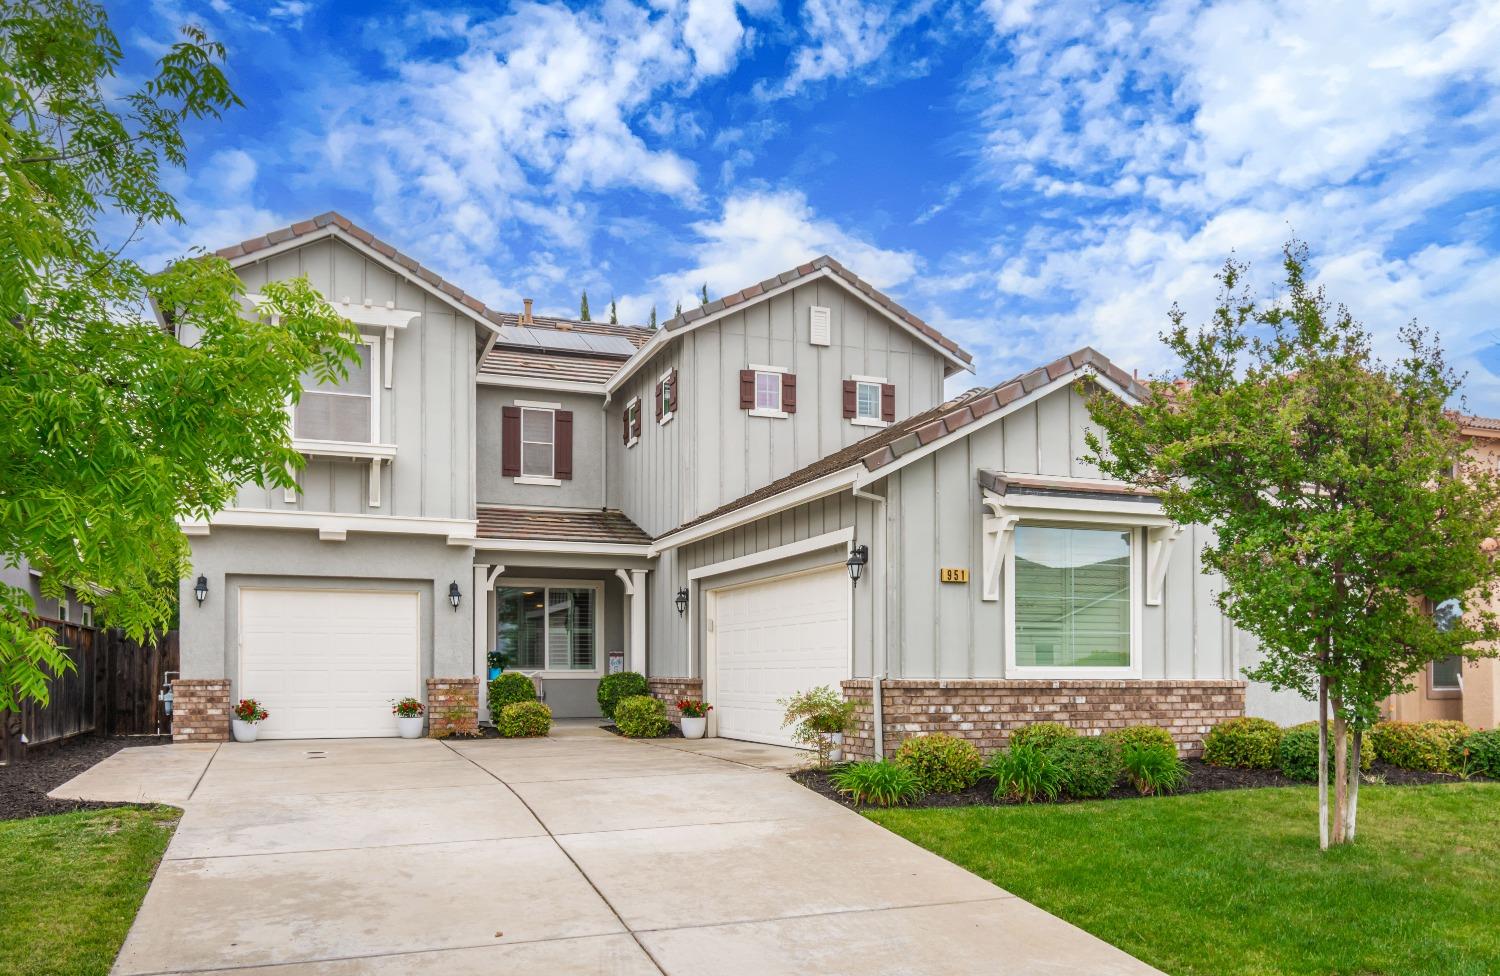 Photo of 951 Station House Ln in Rocklin, CA